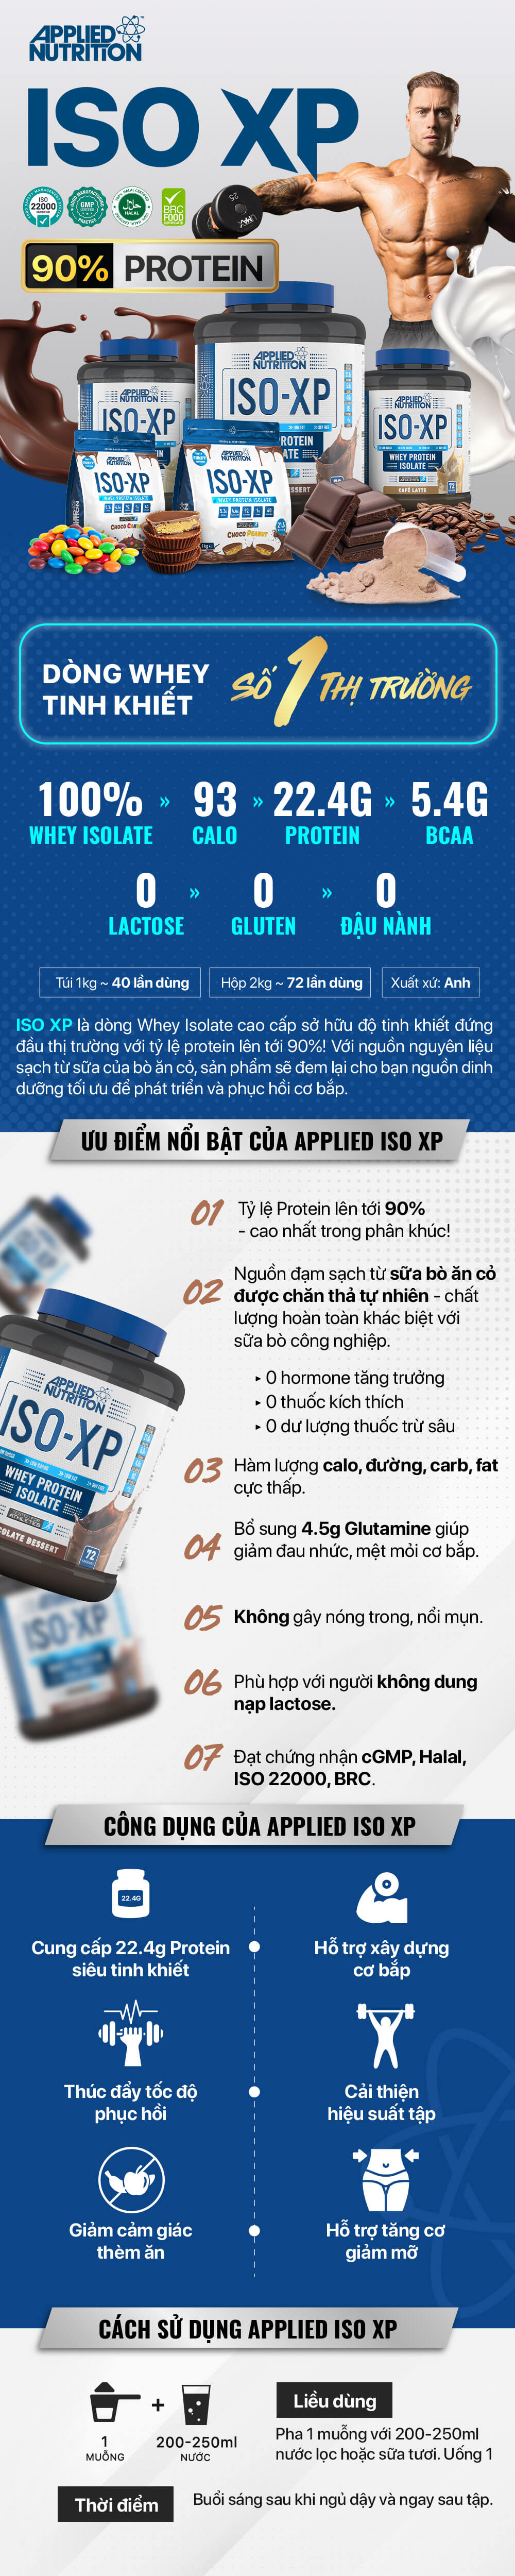 applied-iso-xp-whey-protein-phat-trien-co-bap-gymstore